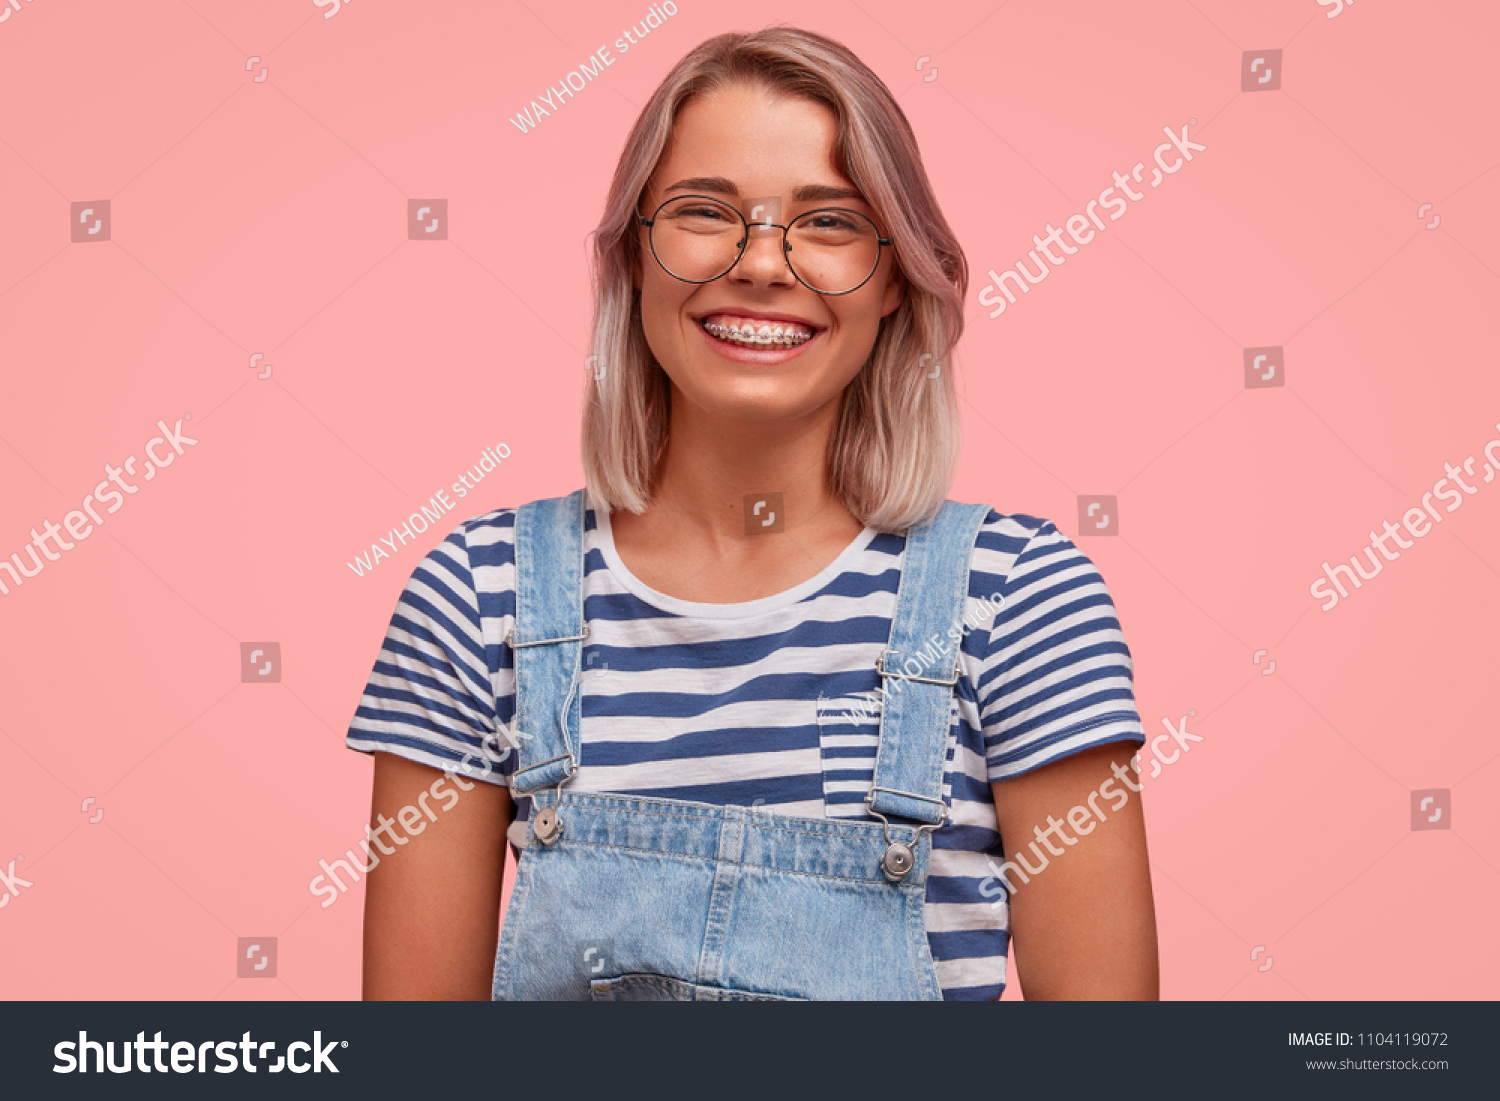 Glad smiling pretty female freelancer, has broad smile, demonstrates teeth with braces, wears casual t shirt with overalls, rejoices recieving reward, stands against pink background. Emotions concept #1104119072